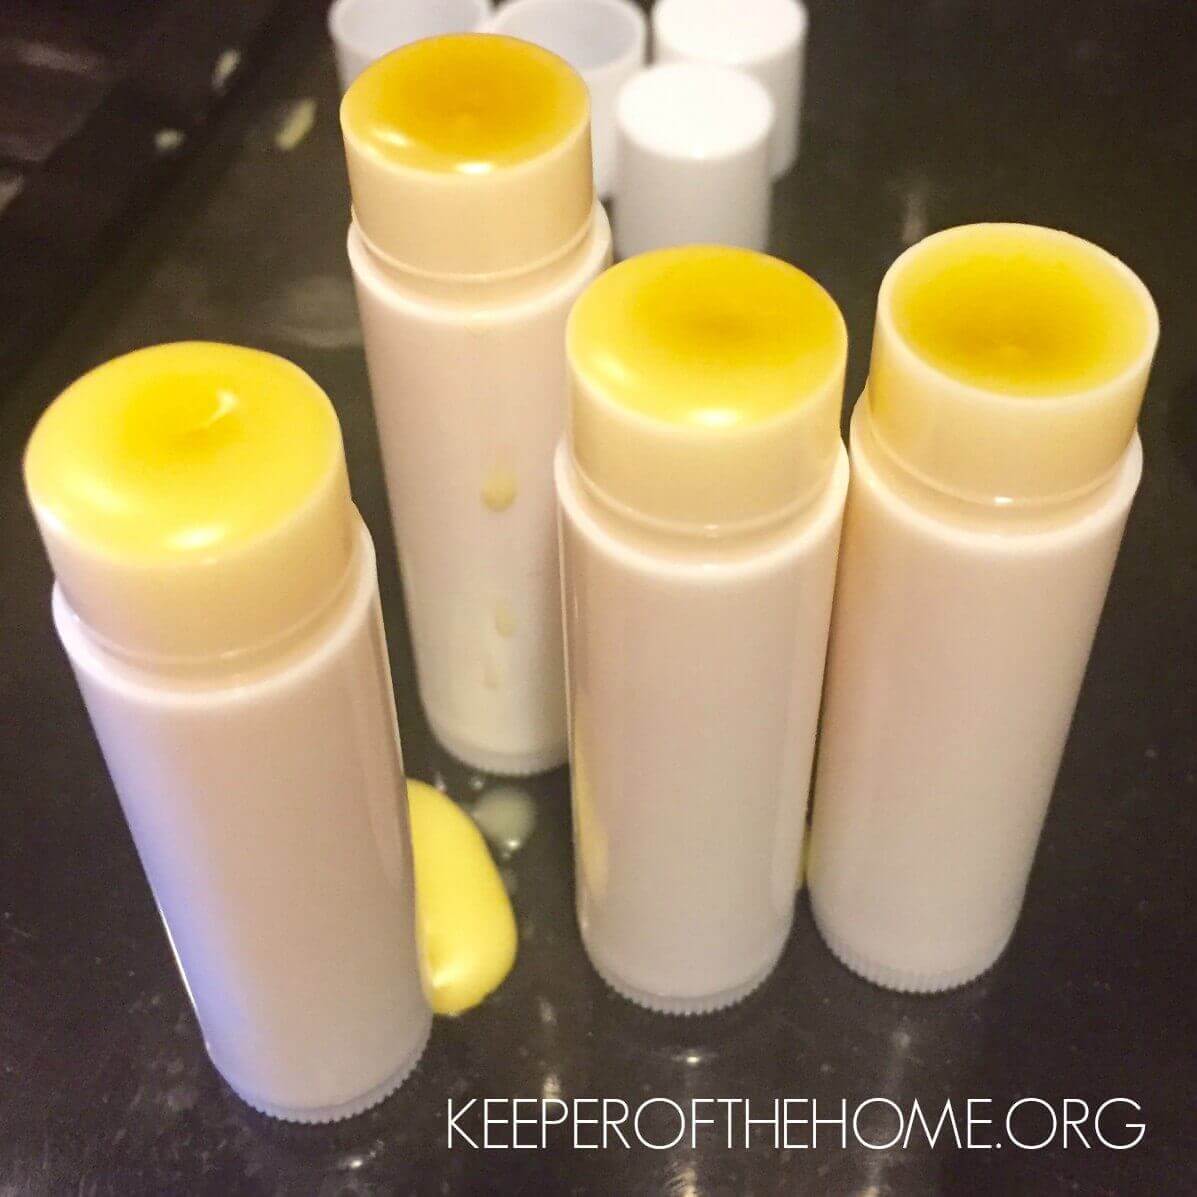 How to Make Natural Lip Balm (with Video) #DIYFriday 10